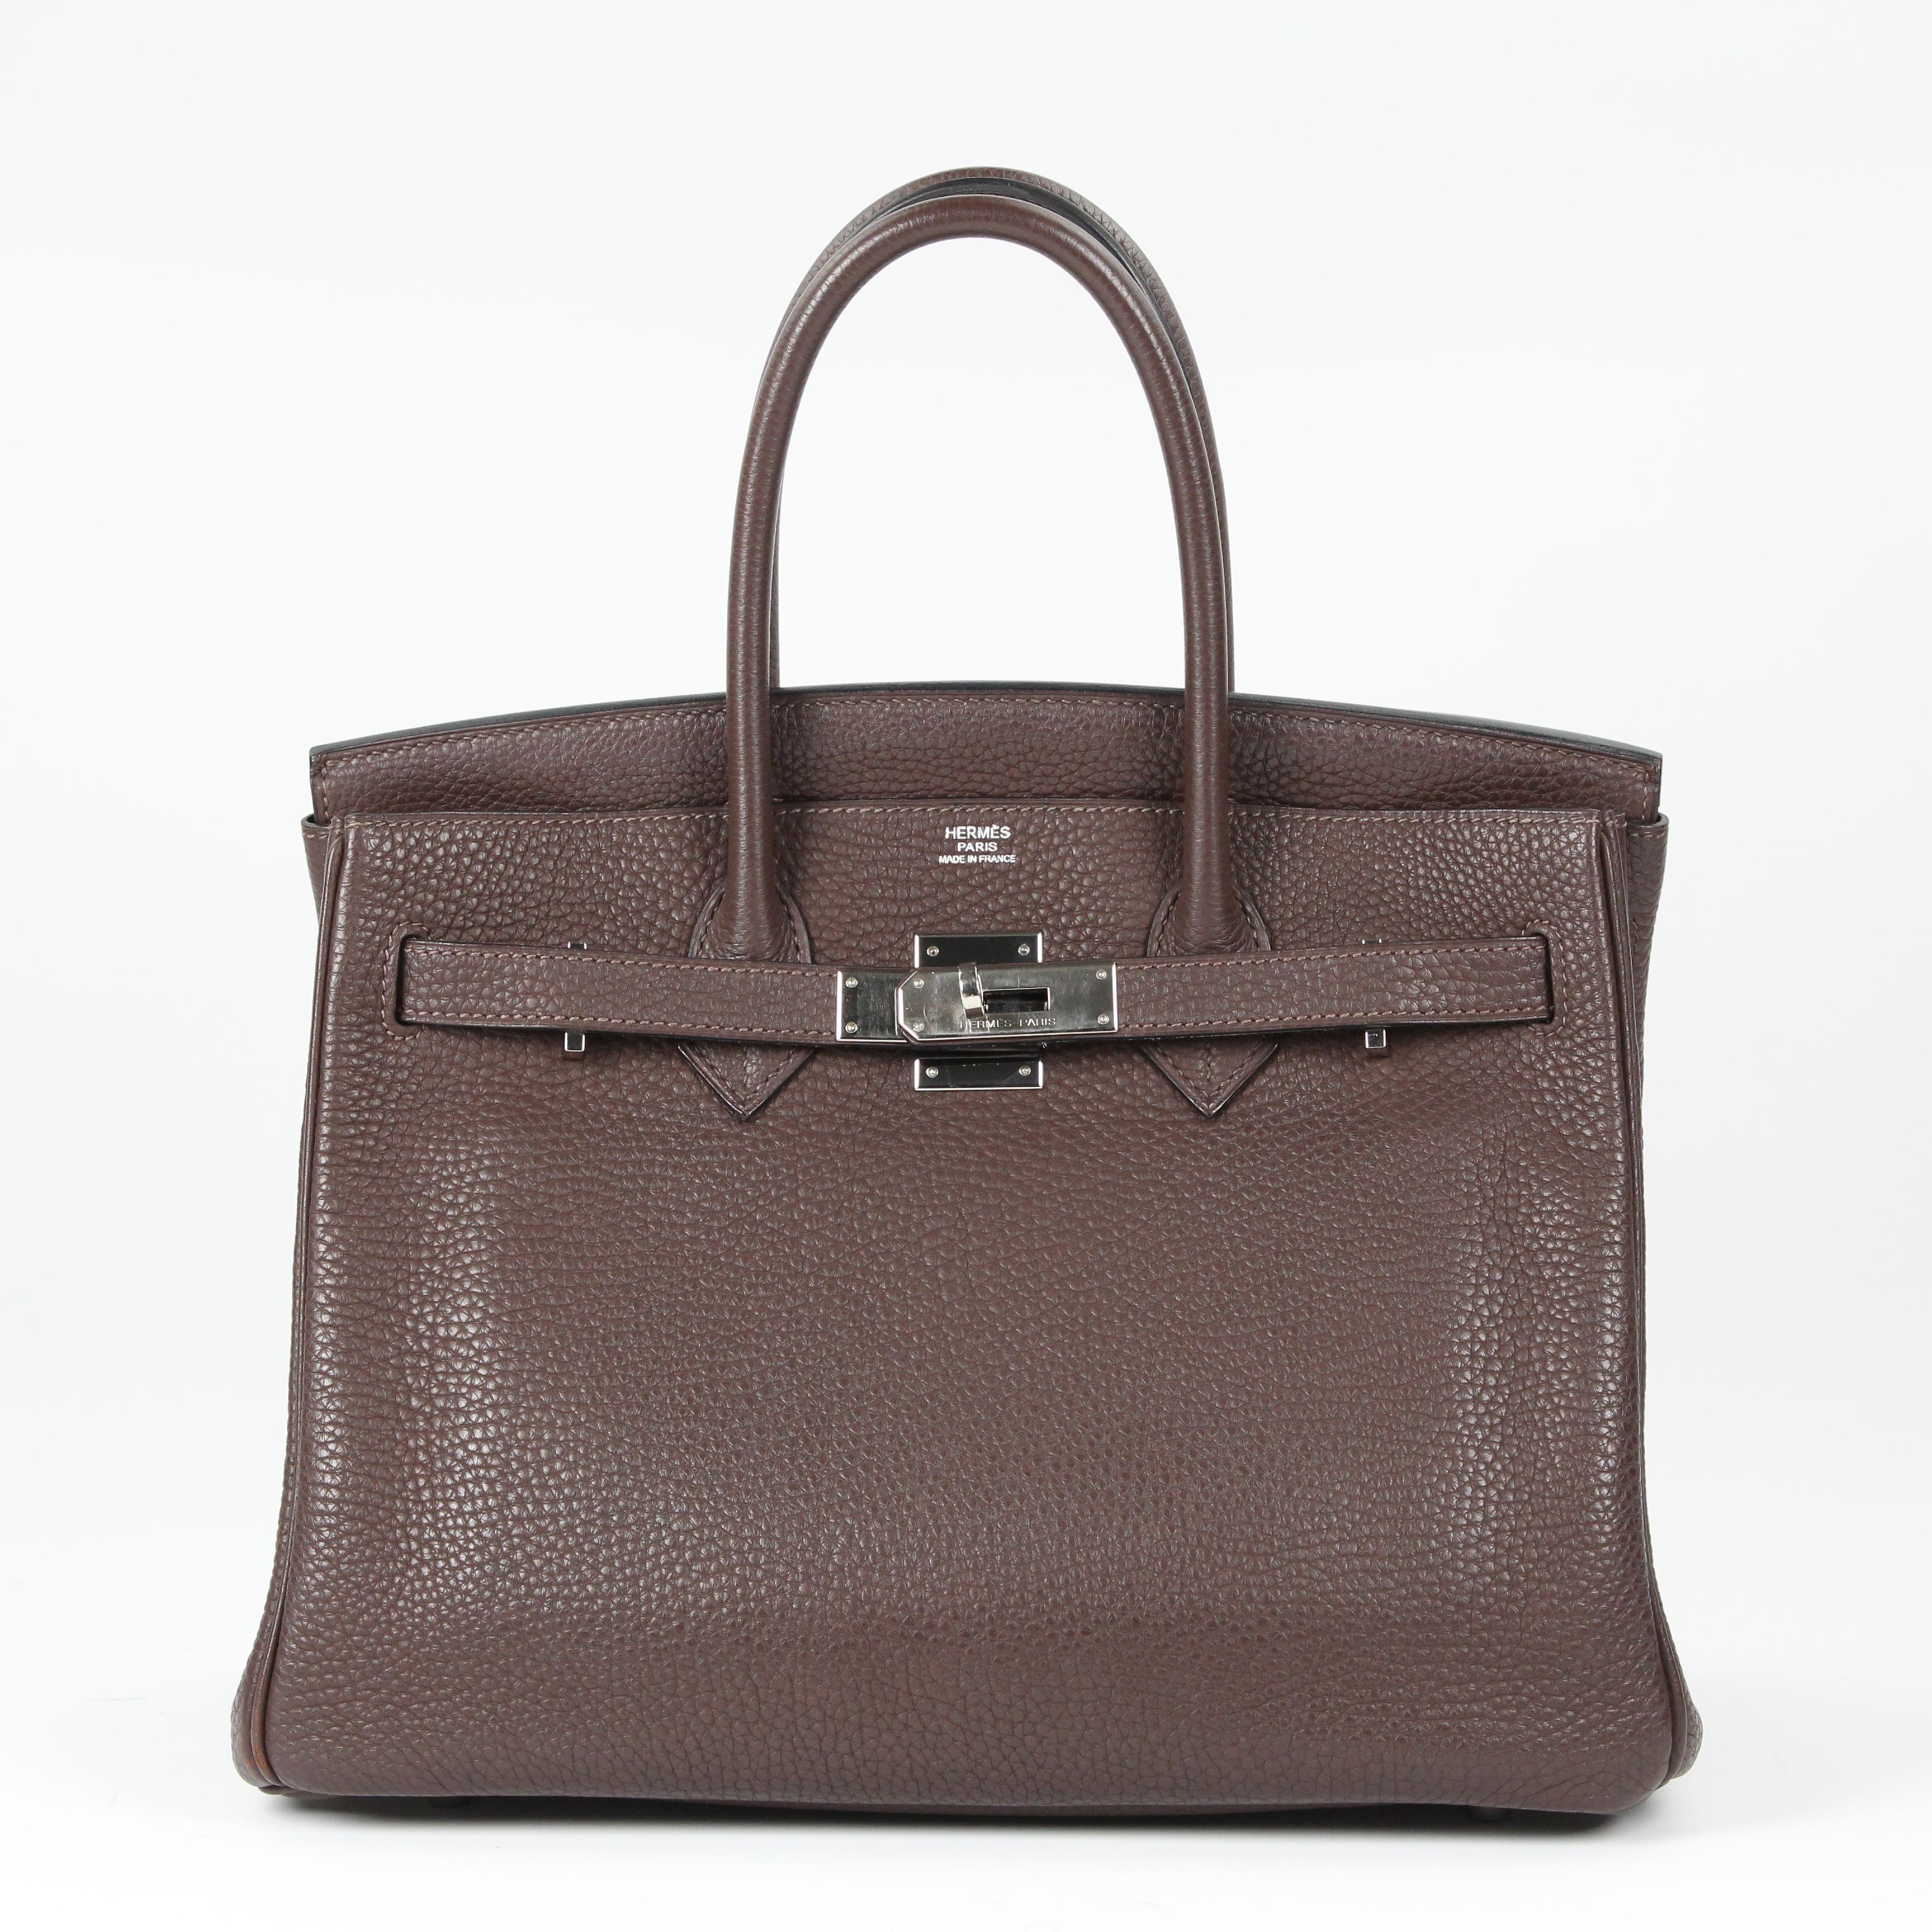 Behold the ultimate dream bag! This is an authentic HERMES Taurillon Clemence Birkin 30 in Chocolate. This classic handbag is beautifully crafted of Clemence calfskin leather in brown. The bag features rolled leather top handles, a short front flap